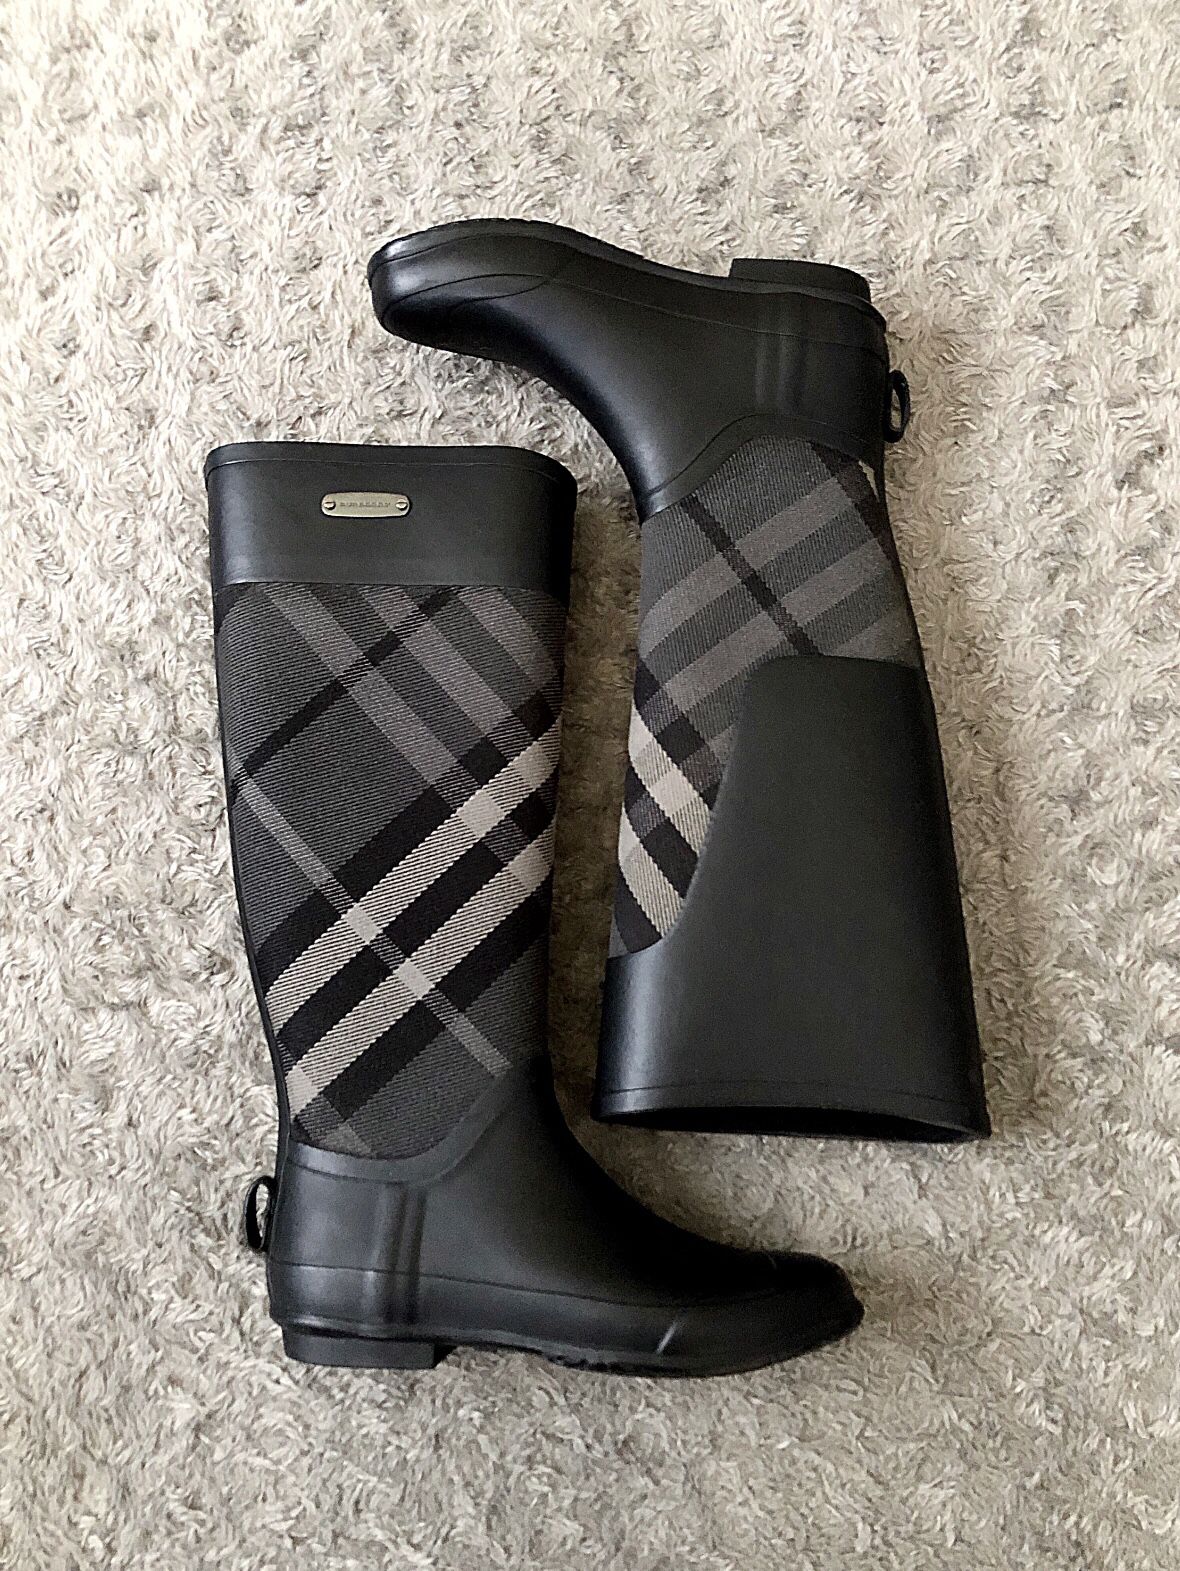 Women's Burberry Clemence Gray Check Canvas Rain Boots size 35 Retail $390 100% Authentic Guaranteed. Like New! Barely worn excellent condition! No S